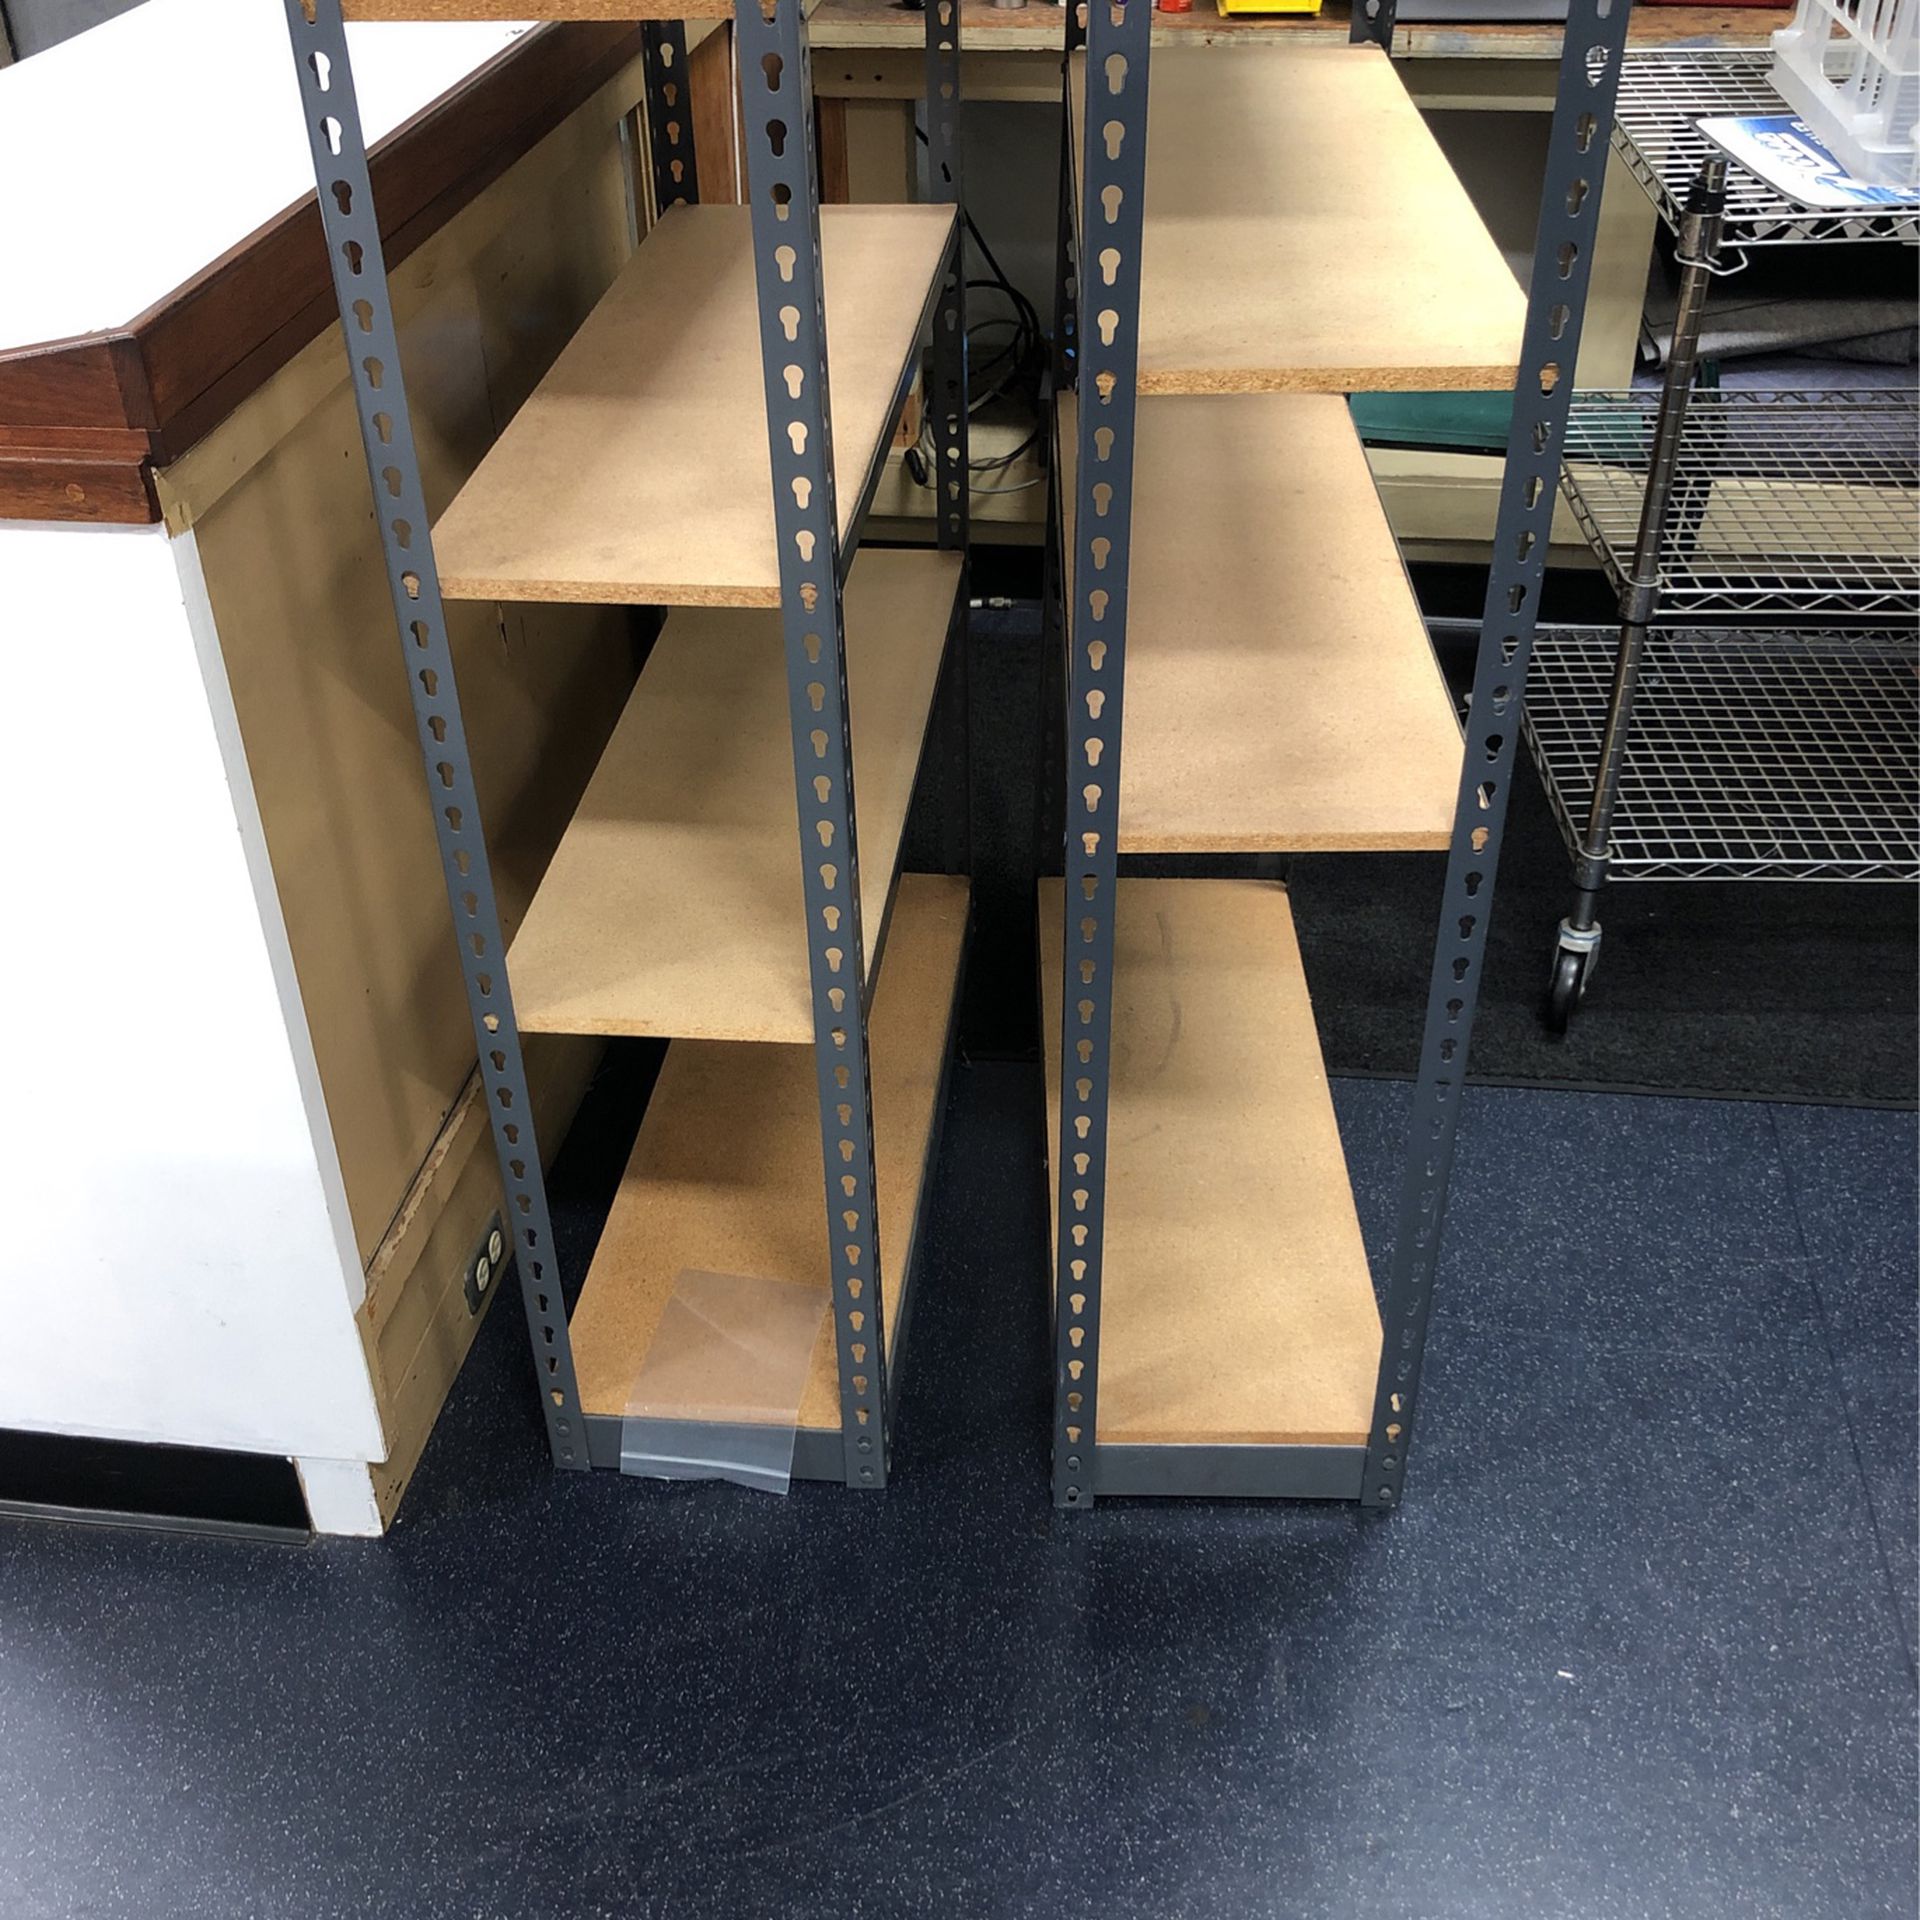 Metal Shelving Storage Two For $50!